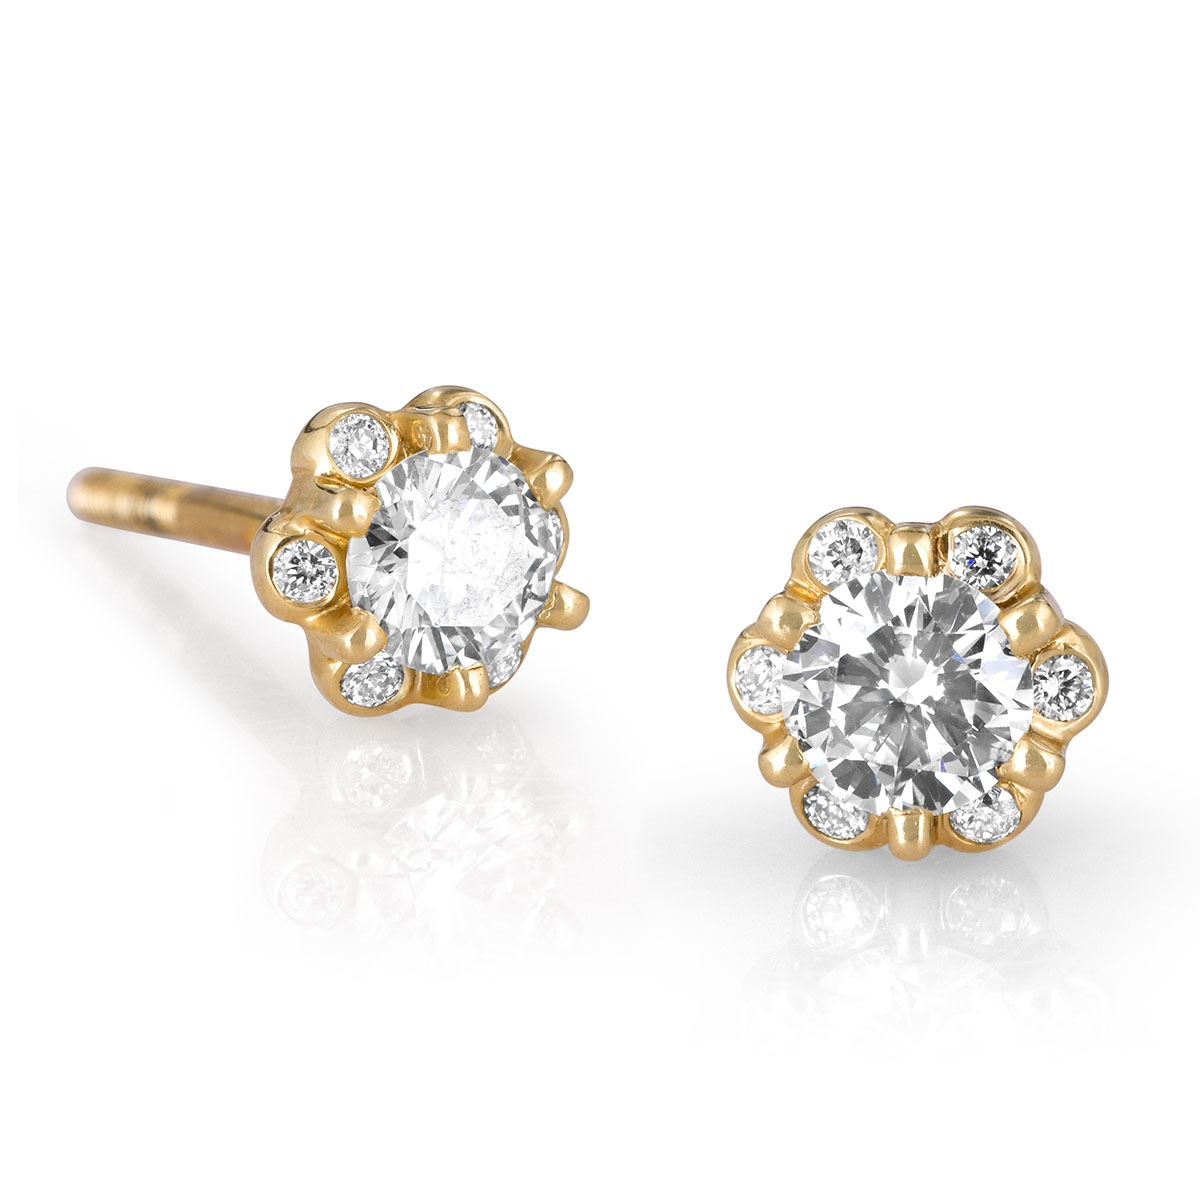 14K Gold Halo Diamond Stud Earrings 0.66 ct (Choice of Color), Jewelry |  Judaica Webstore